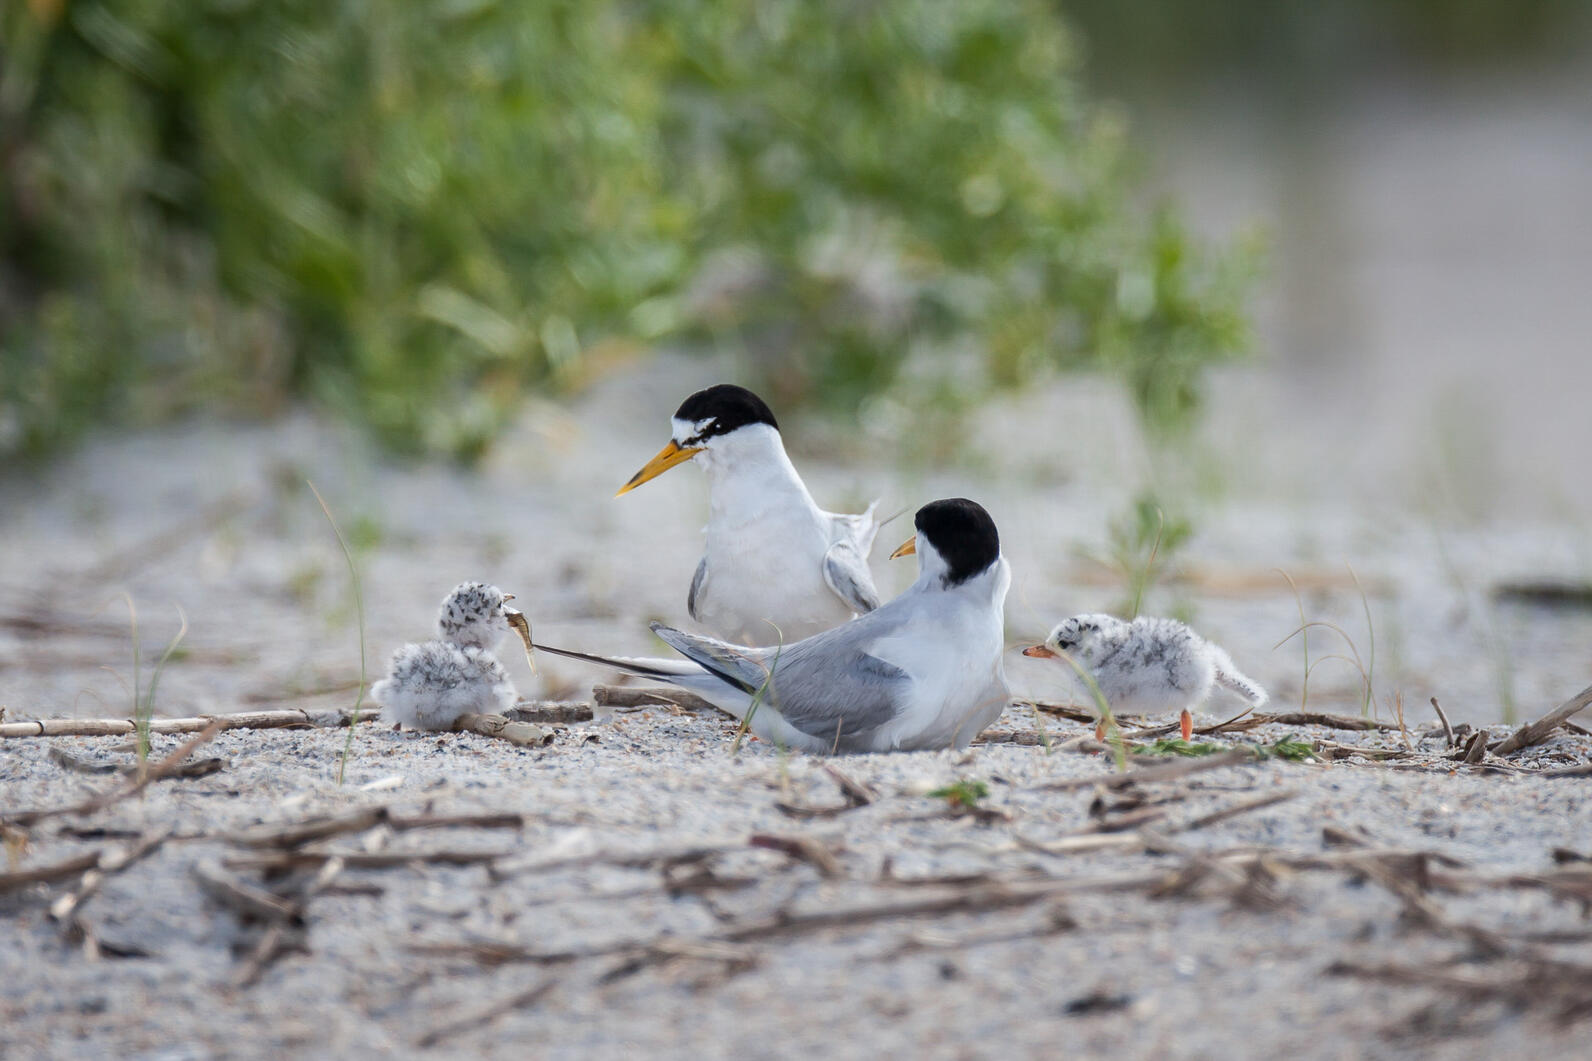 A pair of adult Least Terns watch over a pair of chicks, sitting on a beach.